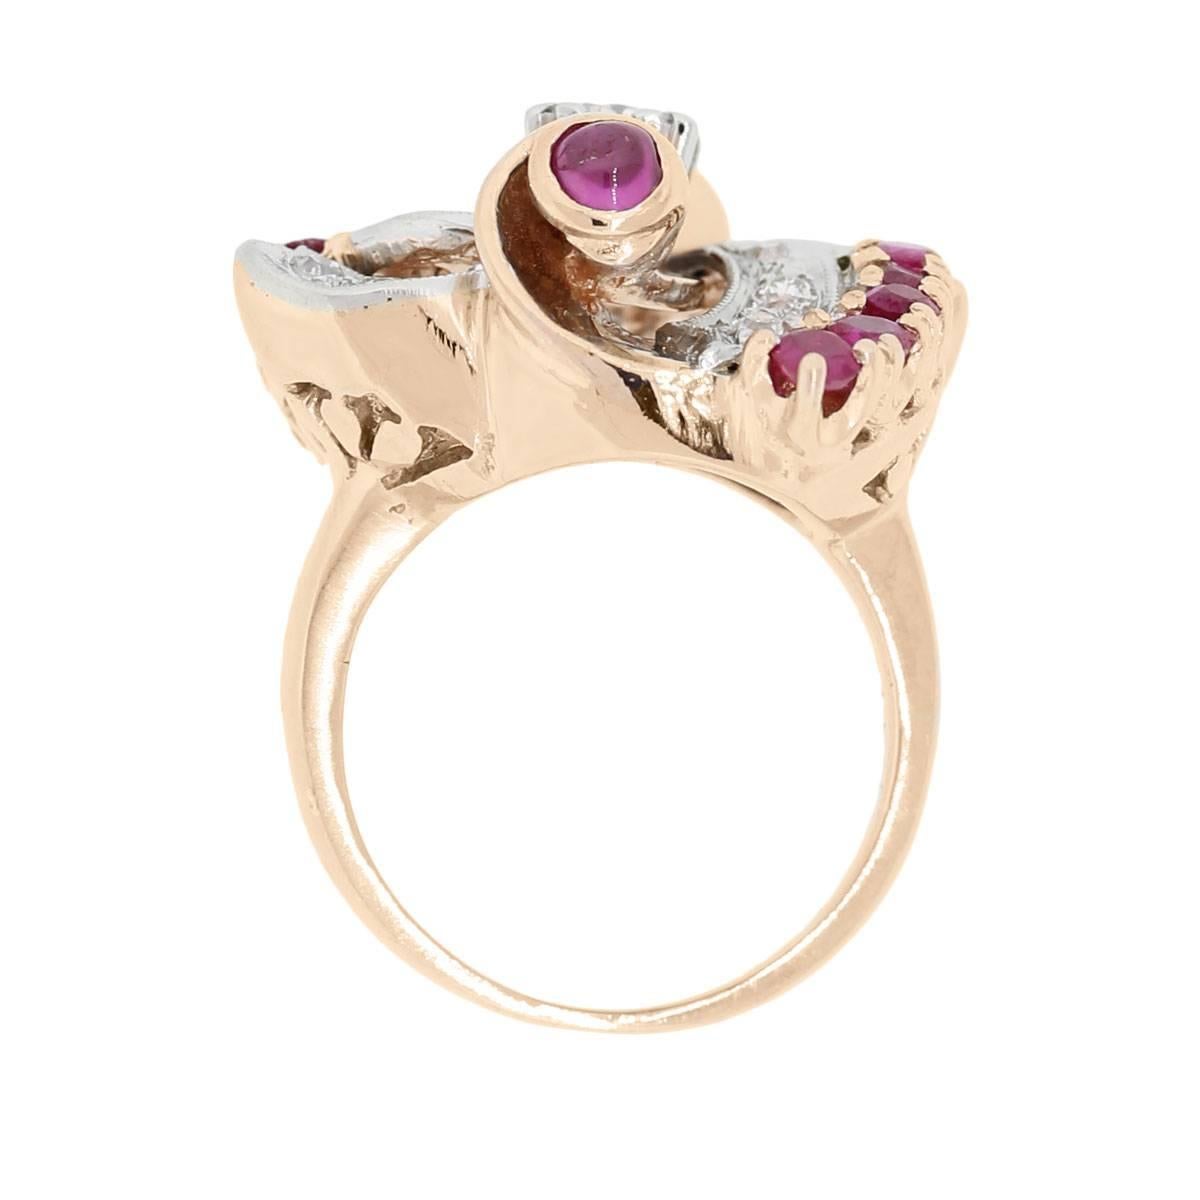 Material: 14k rose gold
Diamond Details: Approximately 0.55ctw of round brilliant diamonds. Diamonds are H/I in color and VS in clarity
Gemstone Details: Approximately 0.65ctw of rubies
Ring Measurements: 1.12